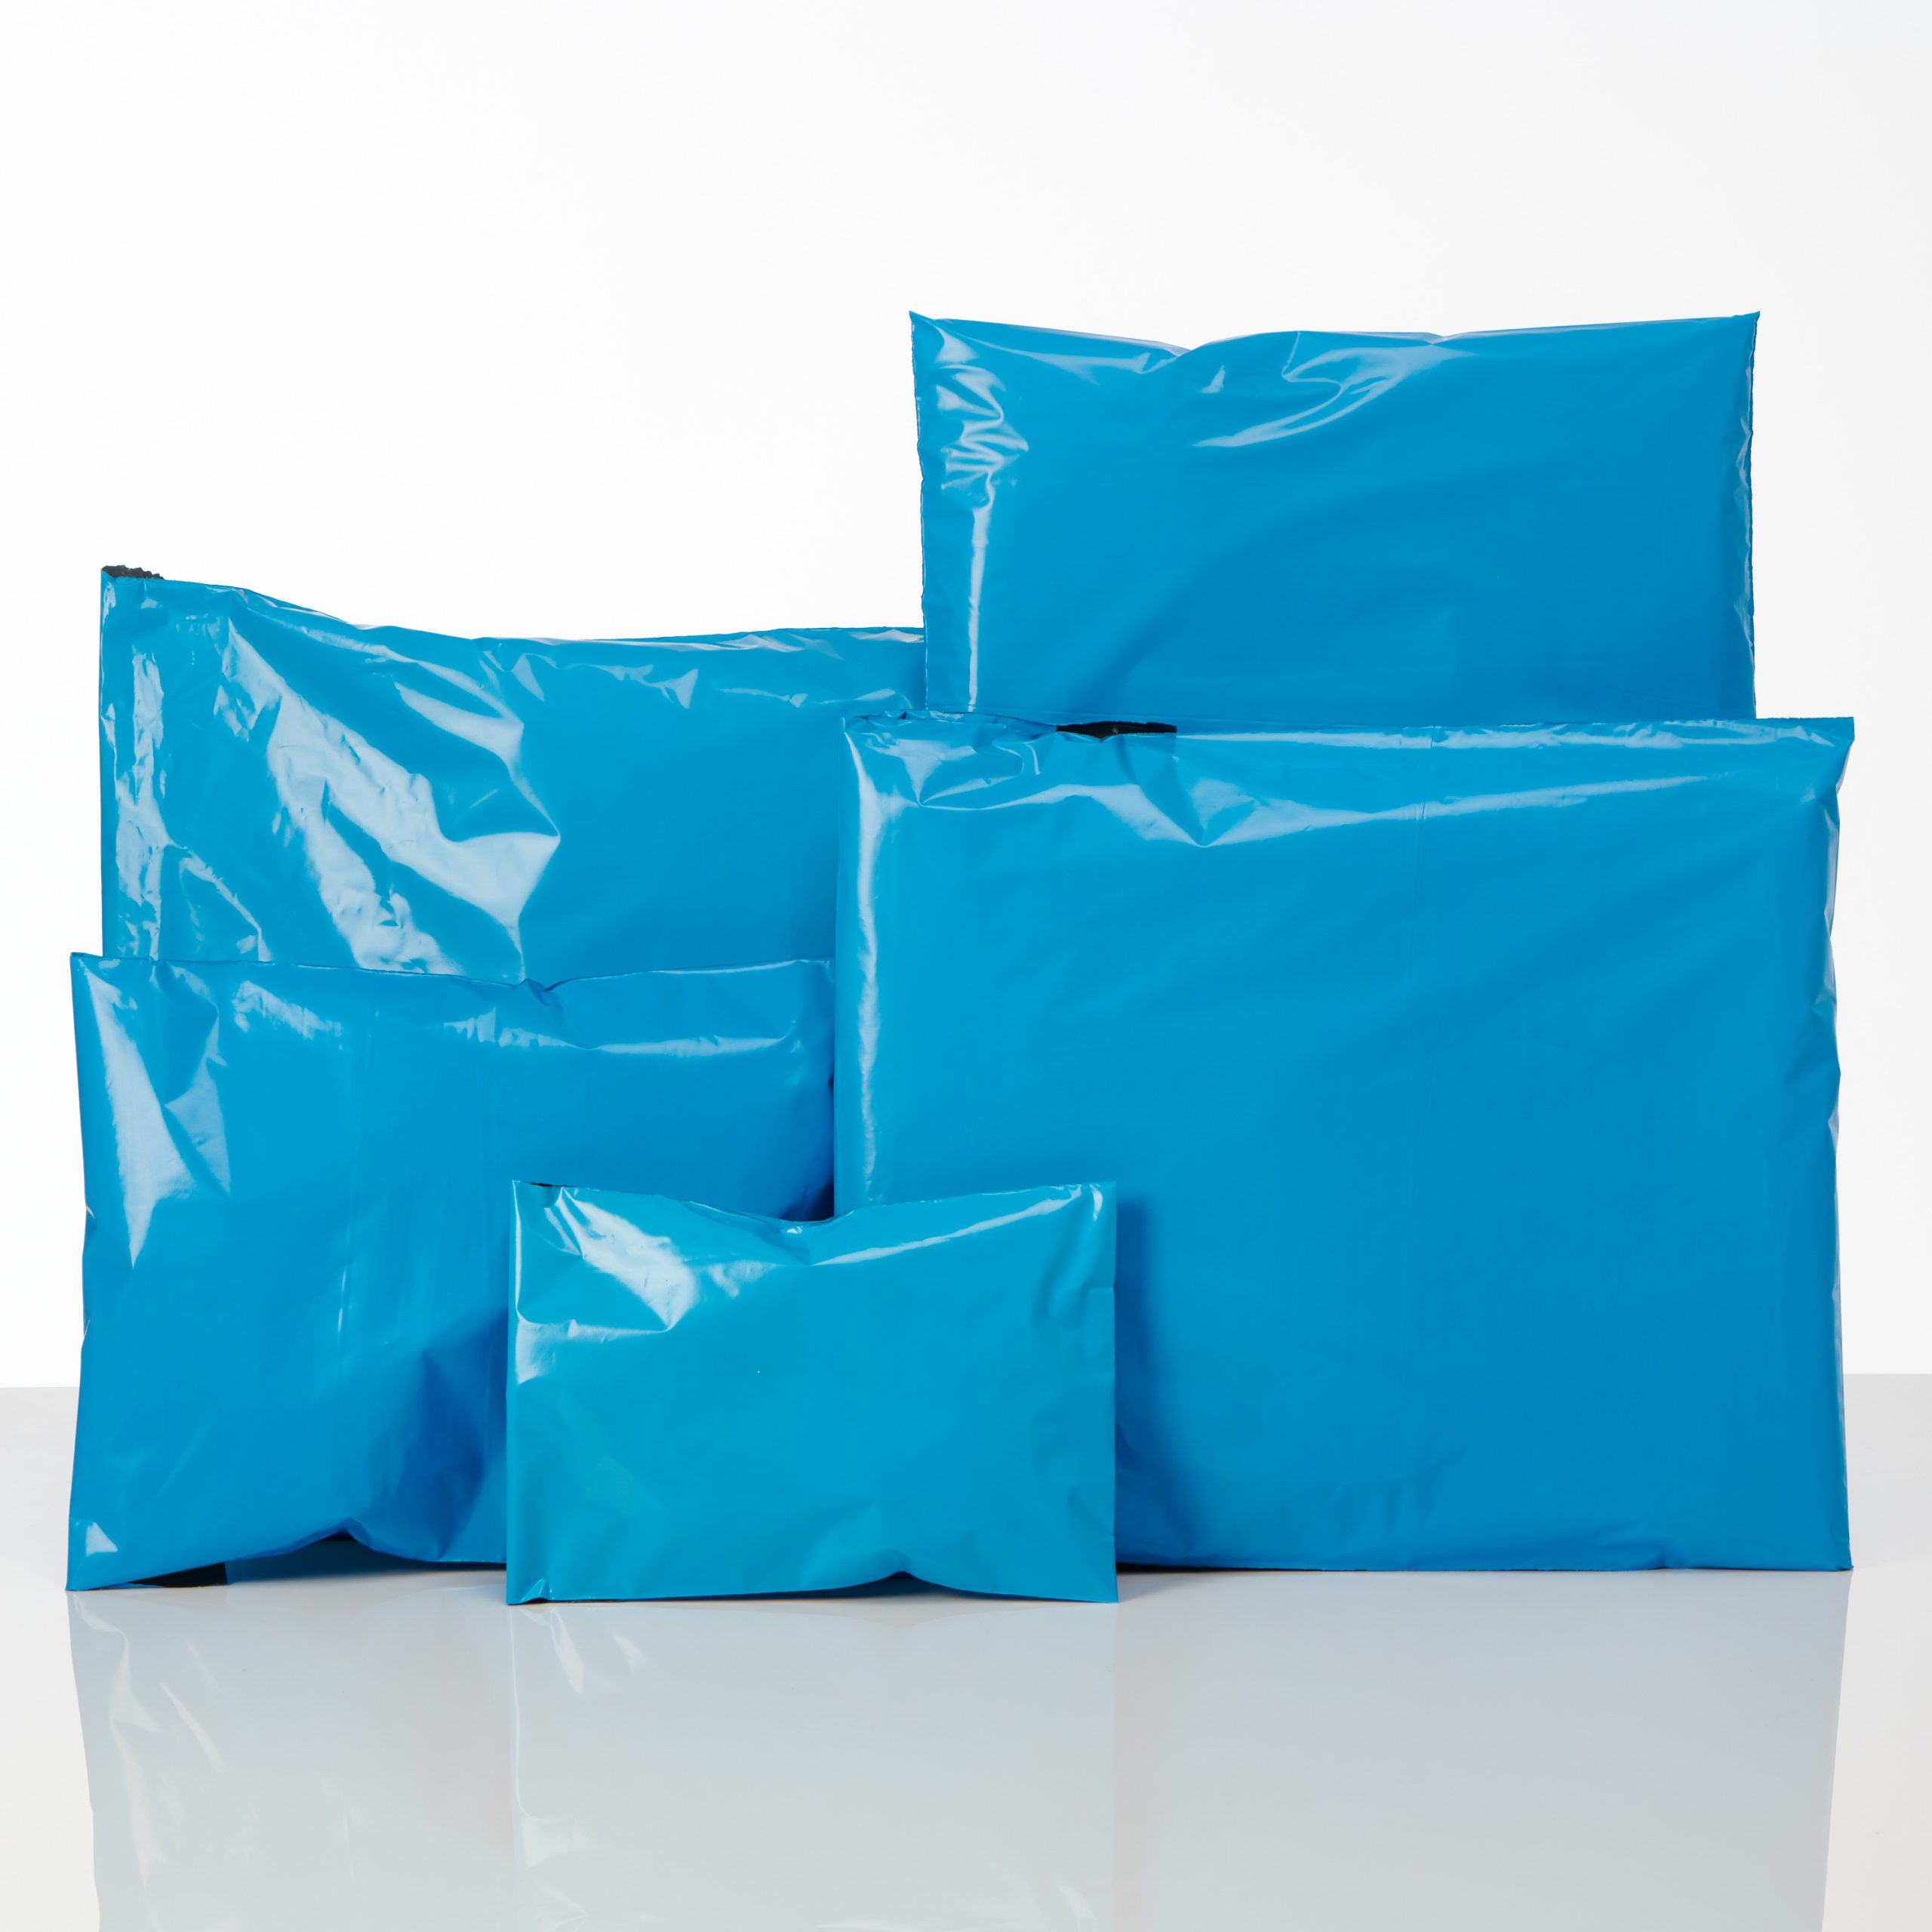 10 25 50 100 500 BLUE MAILING BAGS STRONG SELF SEAL AVAILABLE IN ALL SIZES CHEAP 